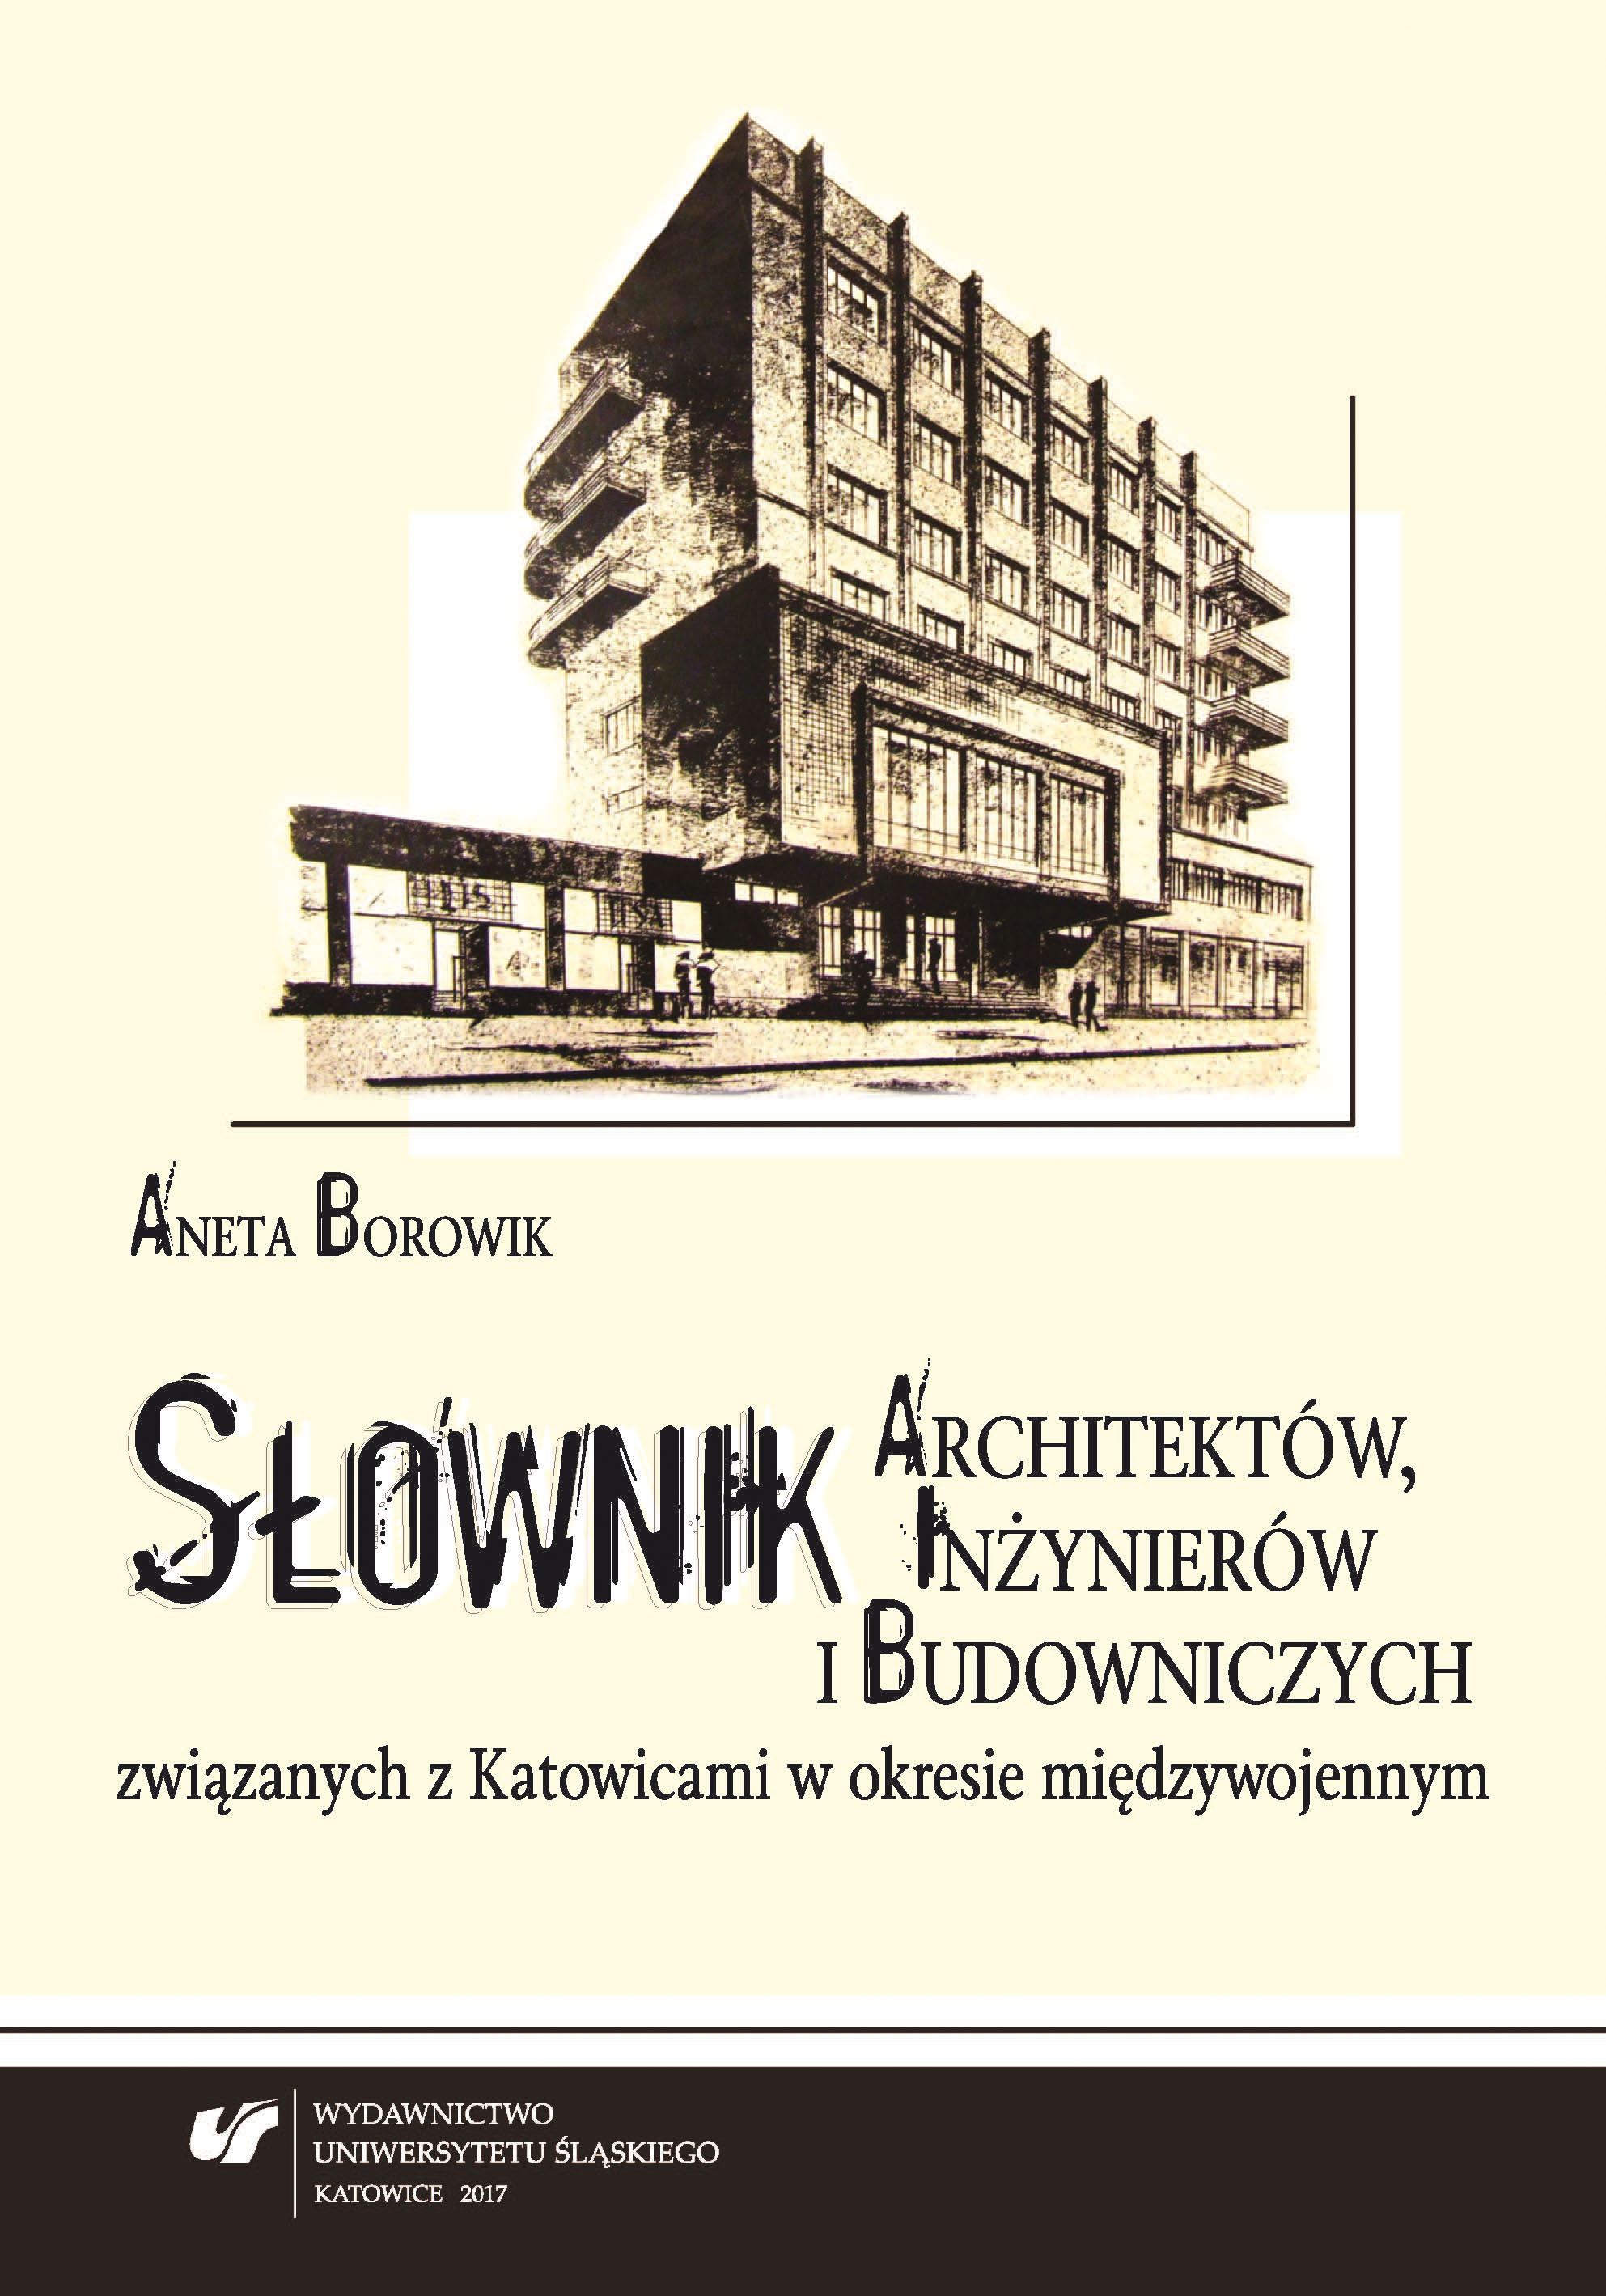 A dictionary of architects, builders and engineers connected with Katowice in the inter-war period